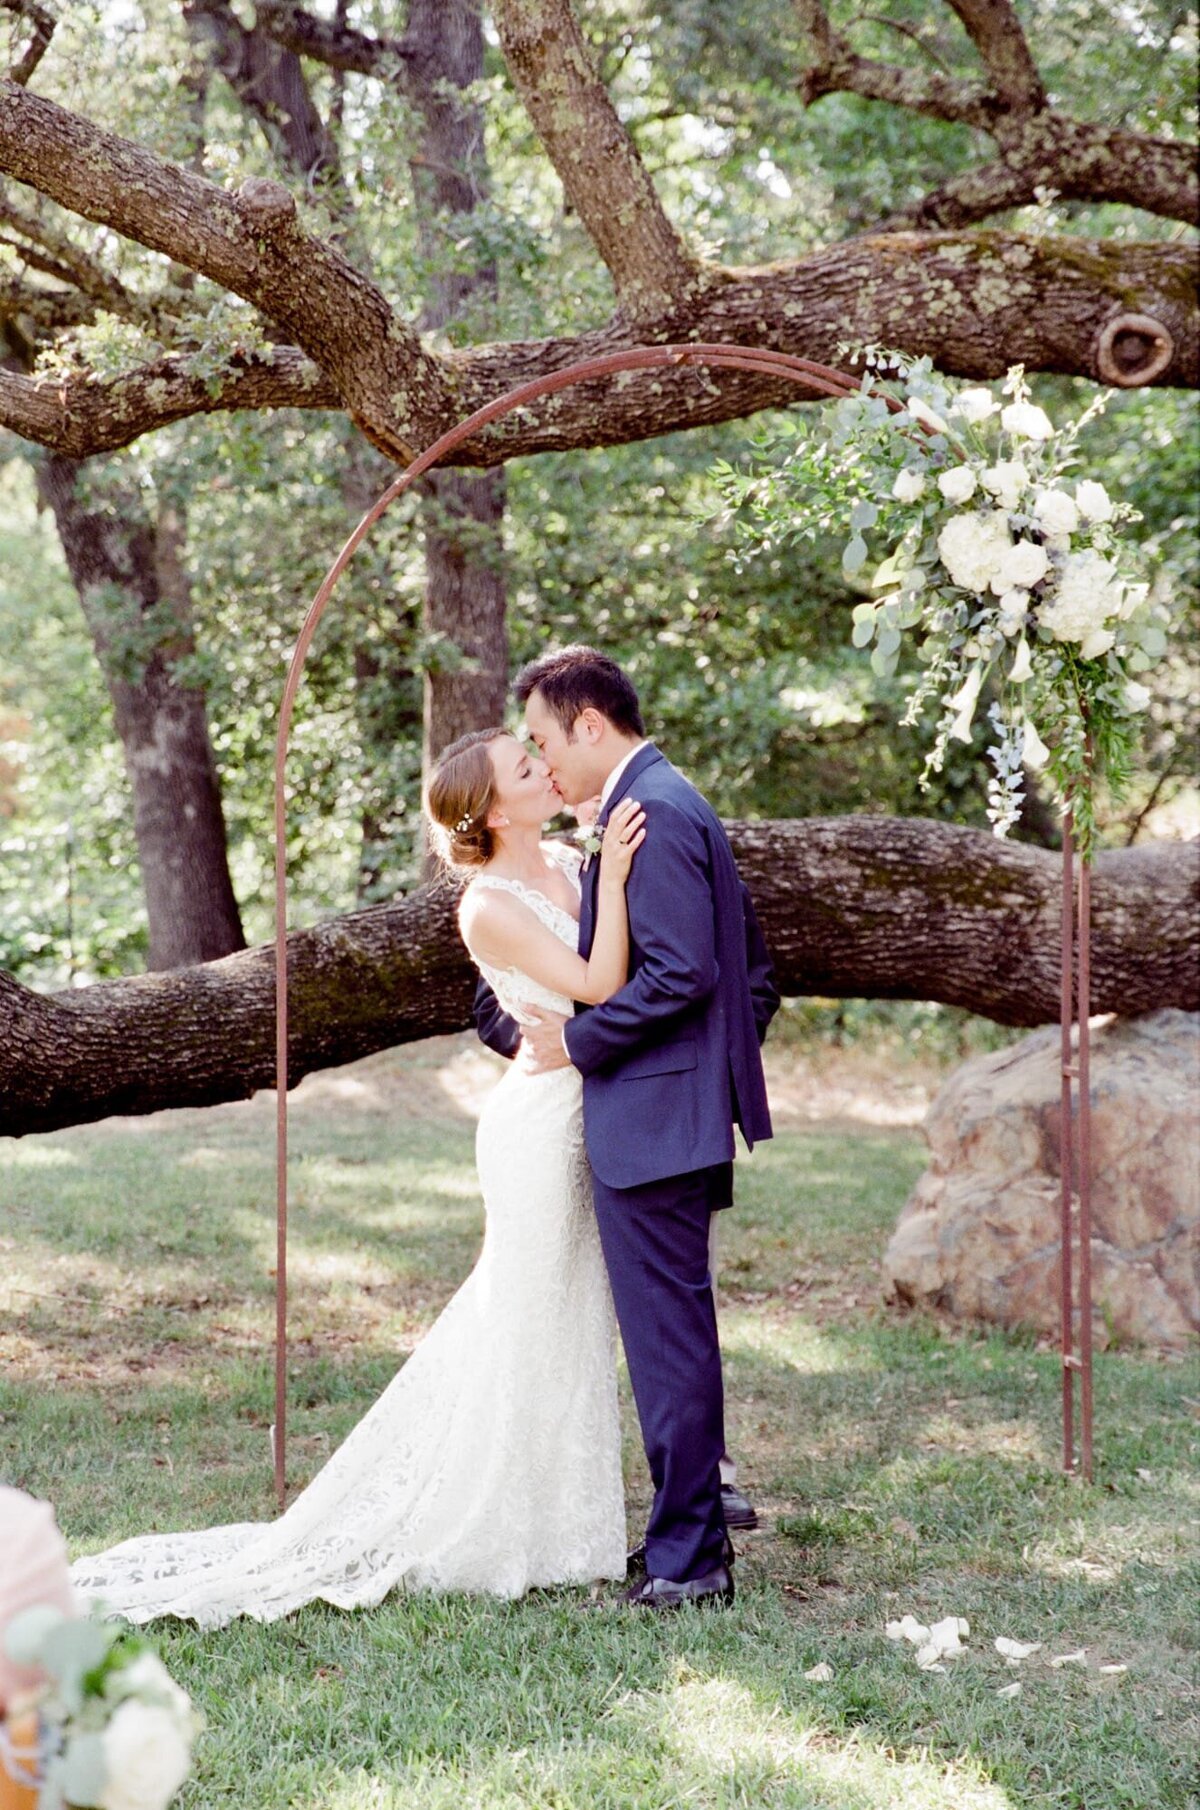 Husband and wife kiss passionately under the woods after a successful farm wedding.